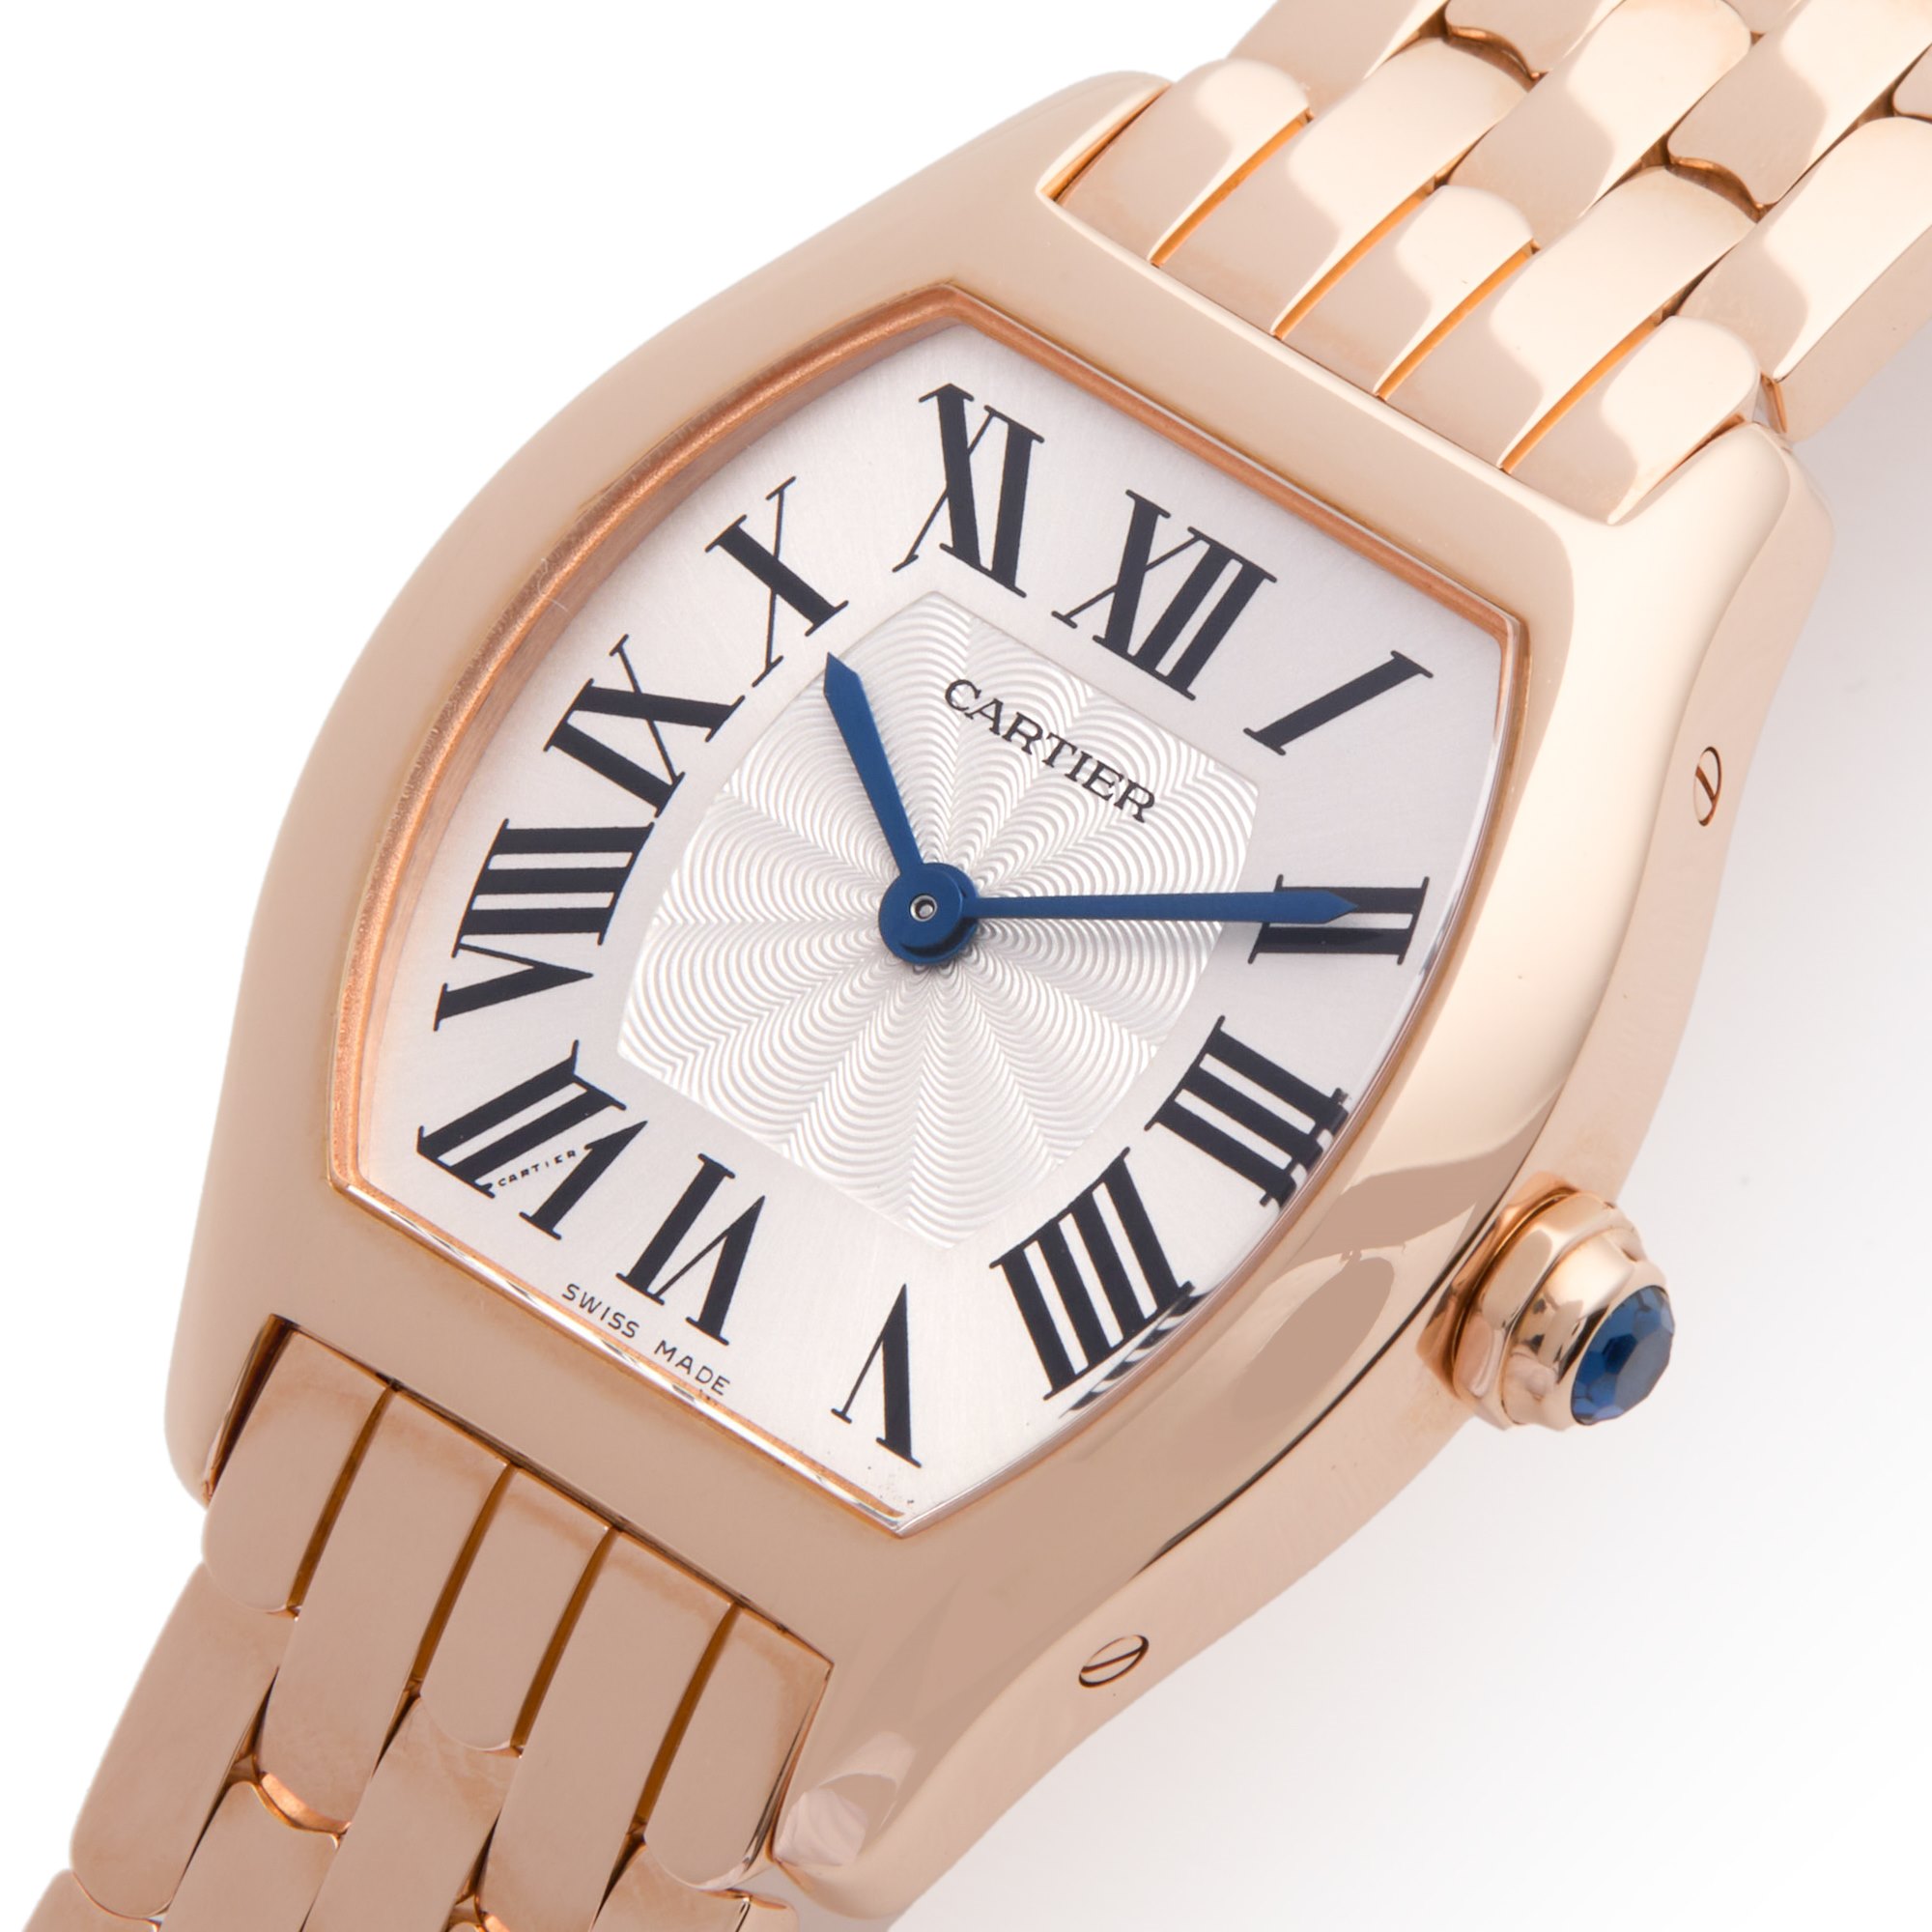 Cartier Tortue 18K Rose Gold W1556364 or 3698